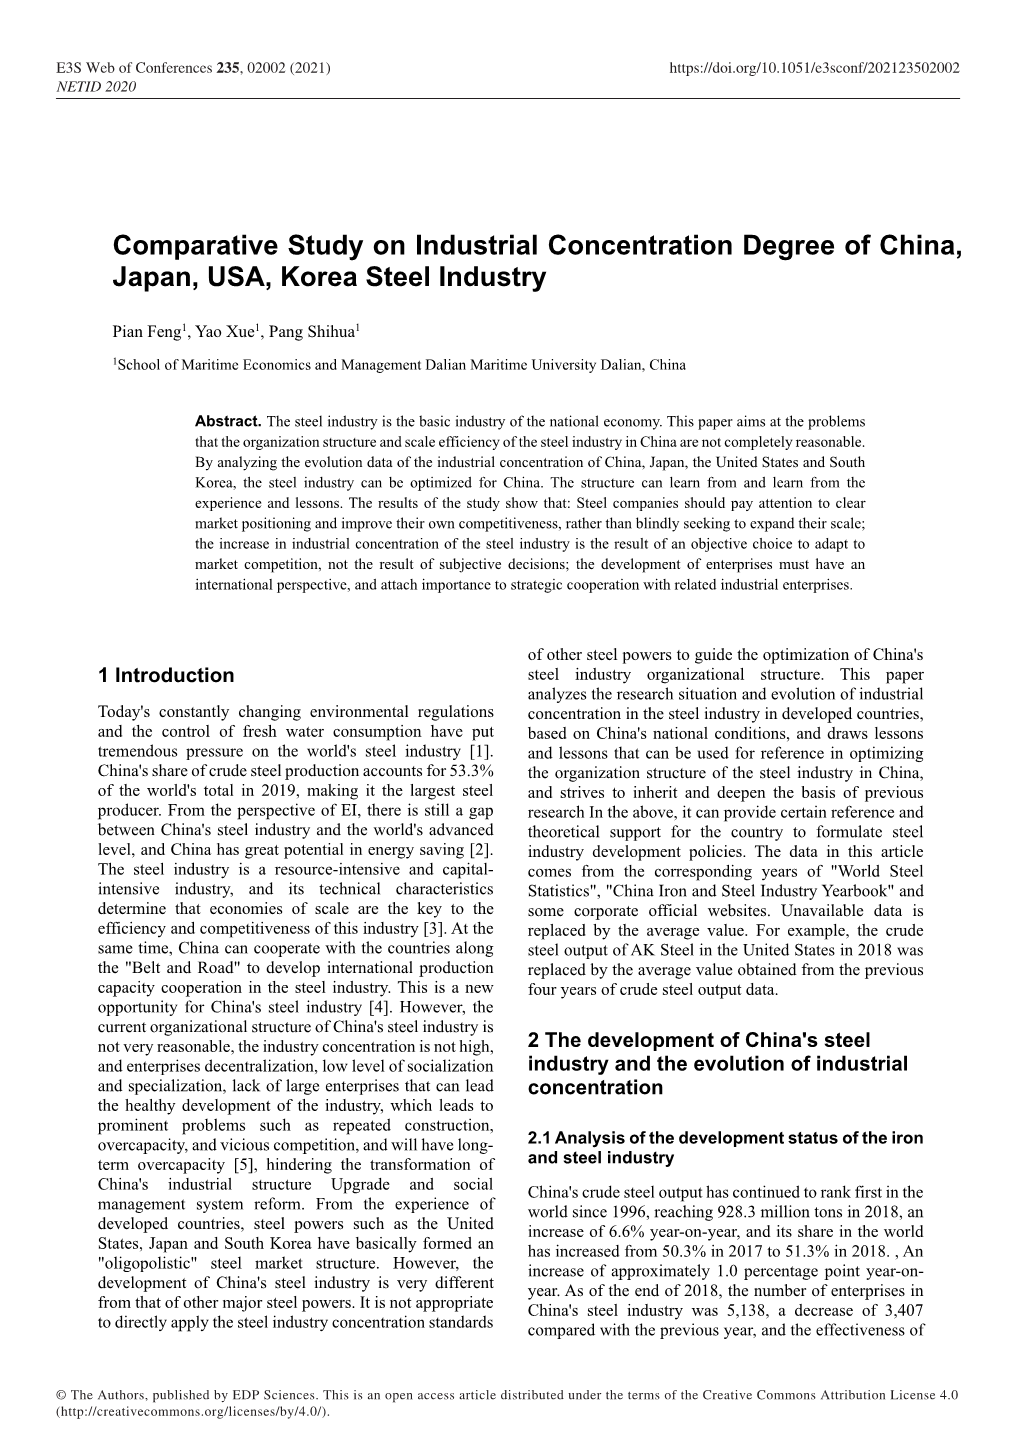 Comparative Study on Industrial Concentration Degree of China, Japan, USA, Korea Steel Industry